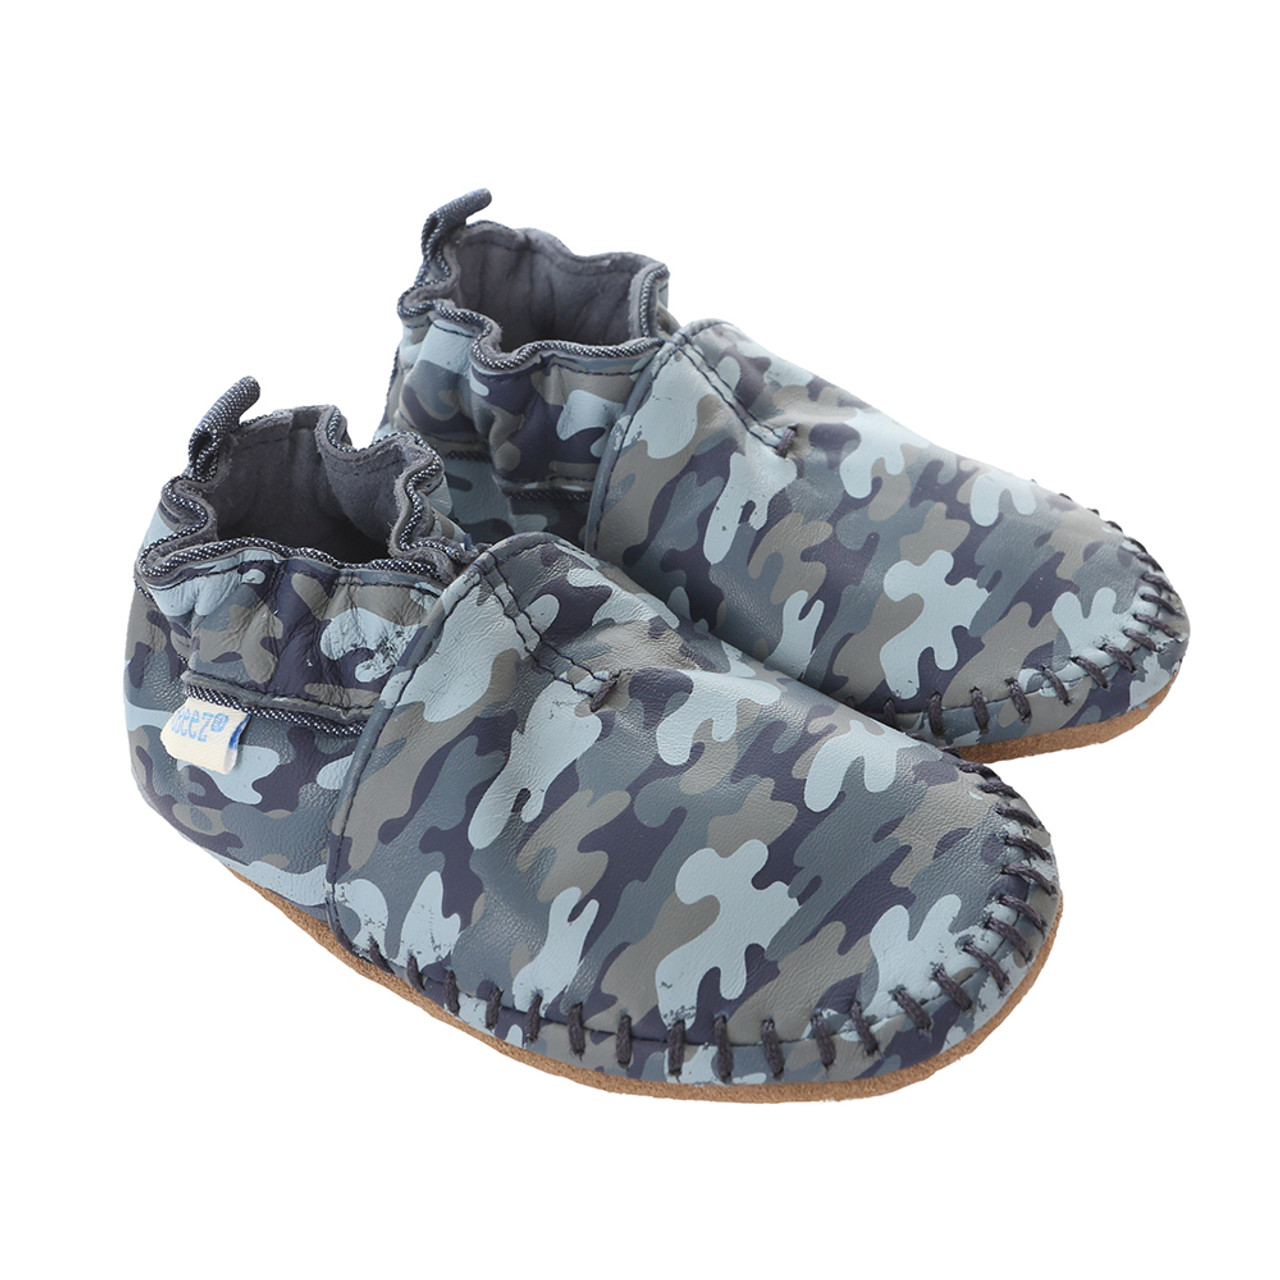 Premium Leather Classic Moccasin Baby Shoes, Navy Camo | Robeez